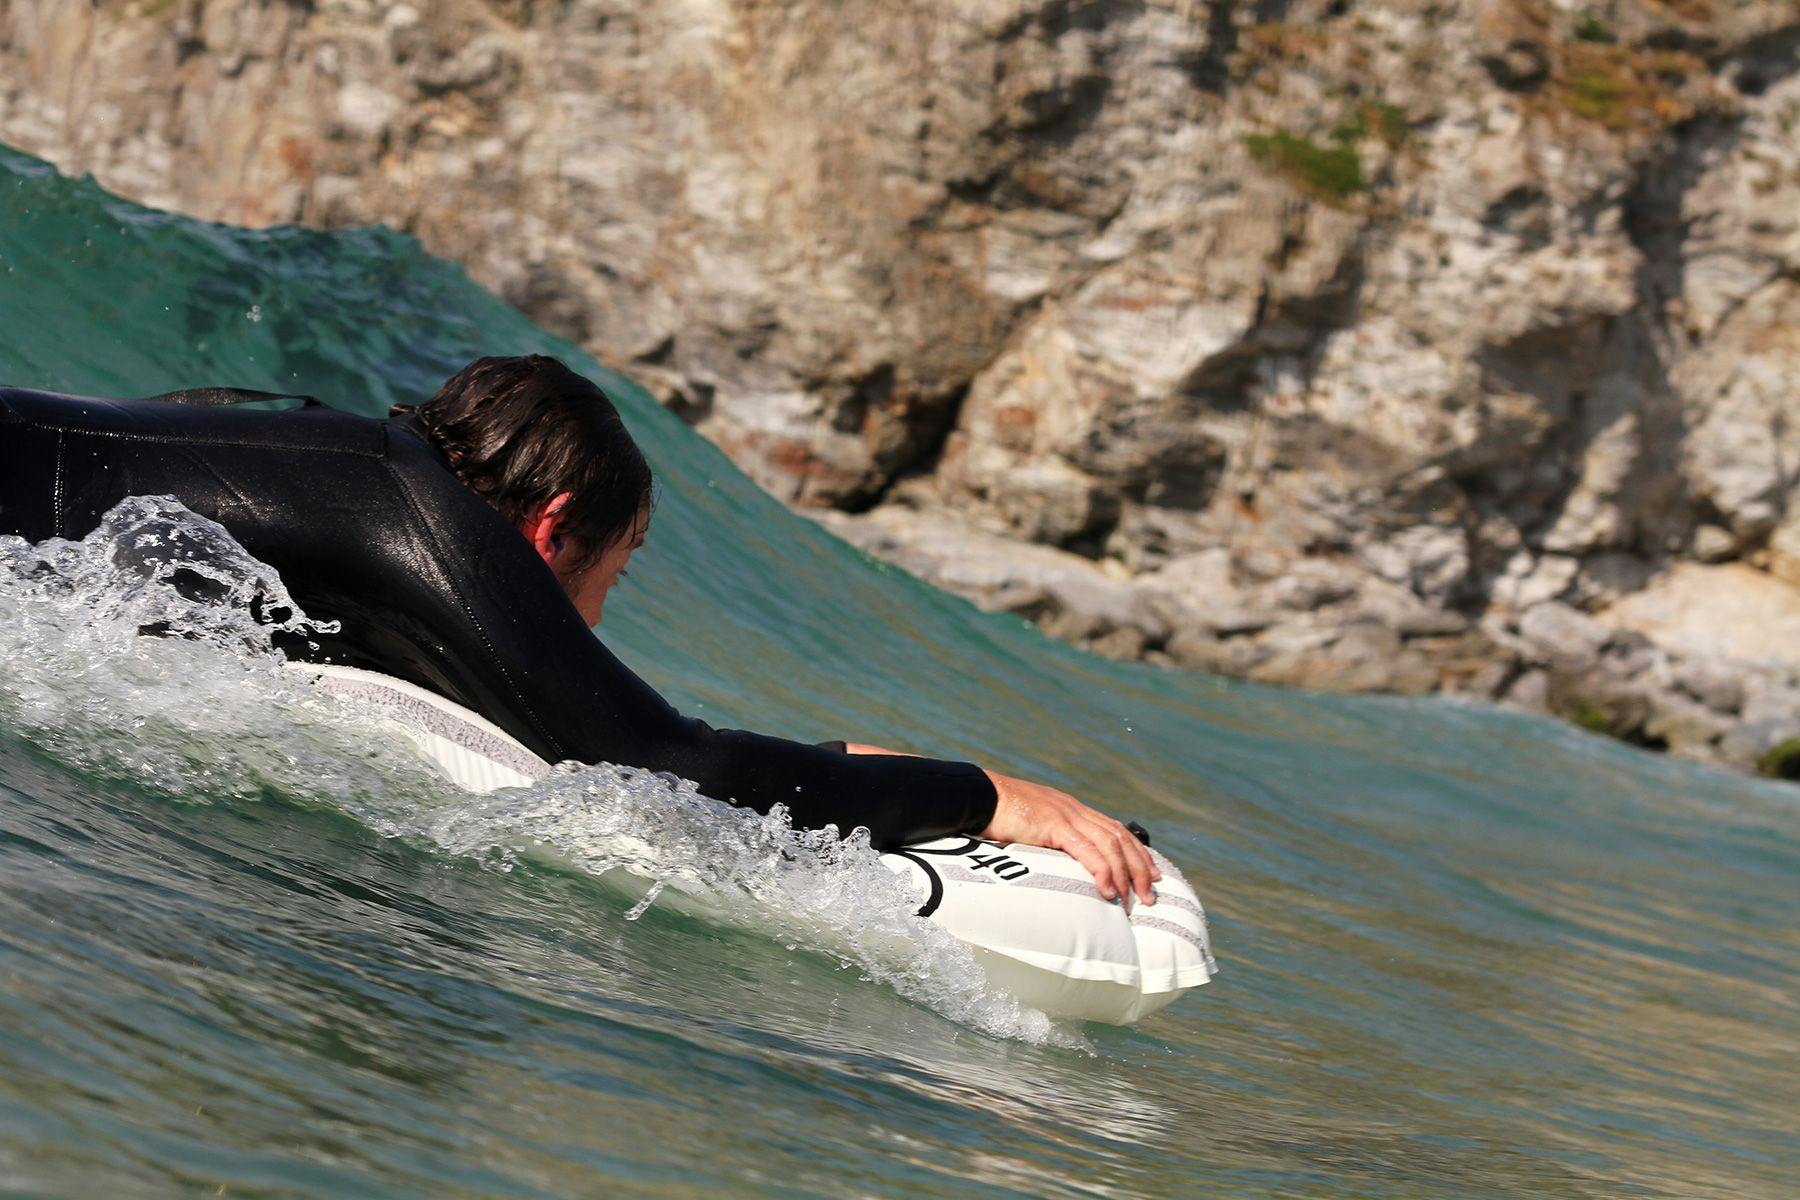 Graeme Webster manipulating his surfmat to the curve of the wave as he drops in. Photographed by Mat Arney.